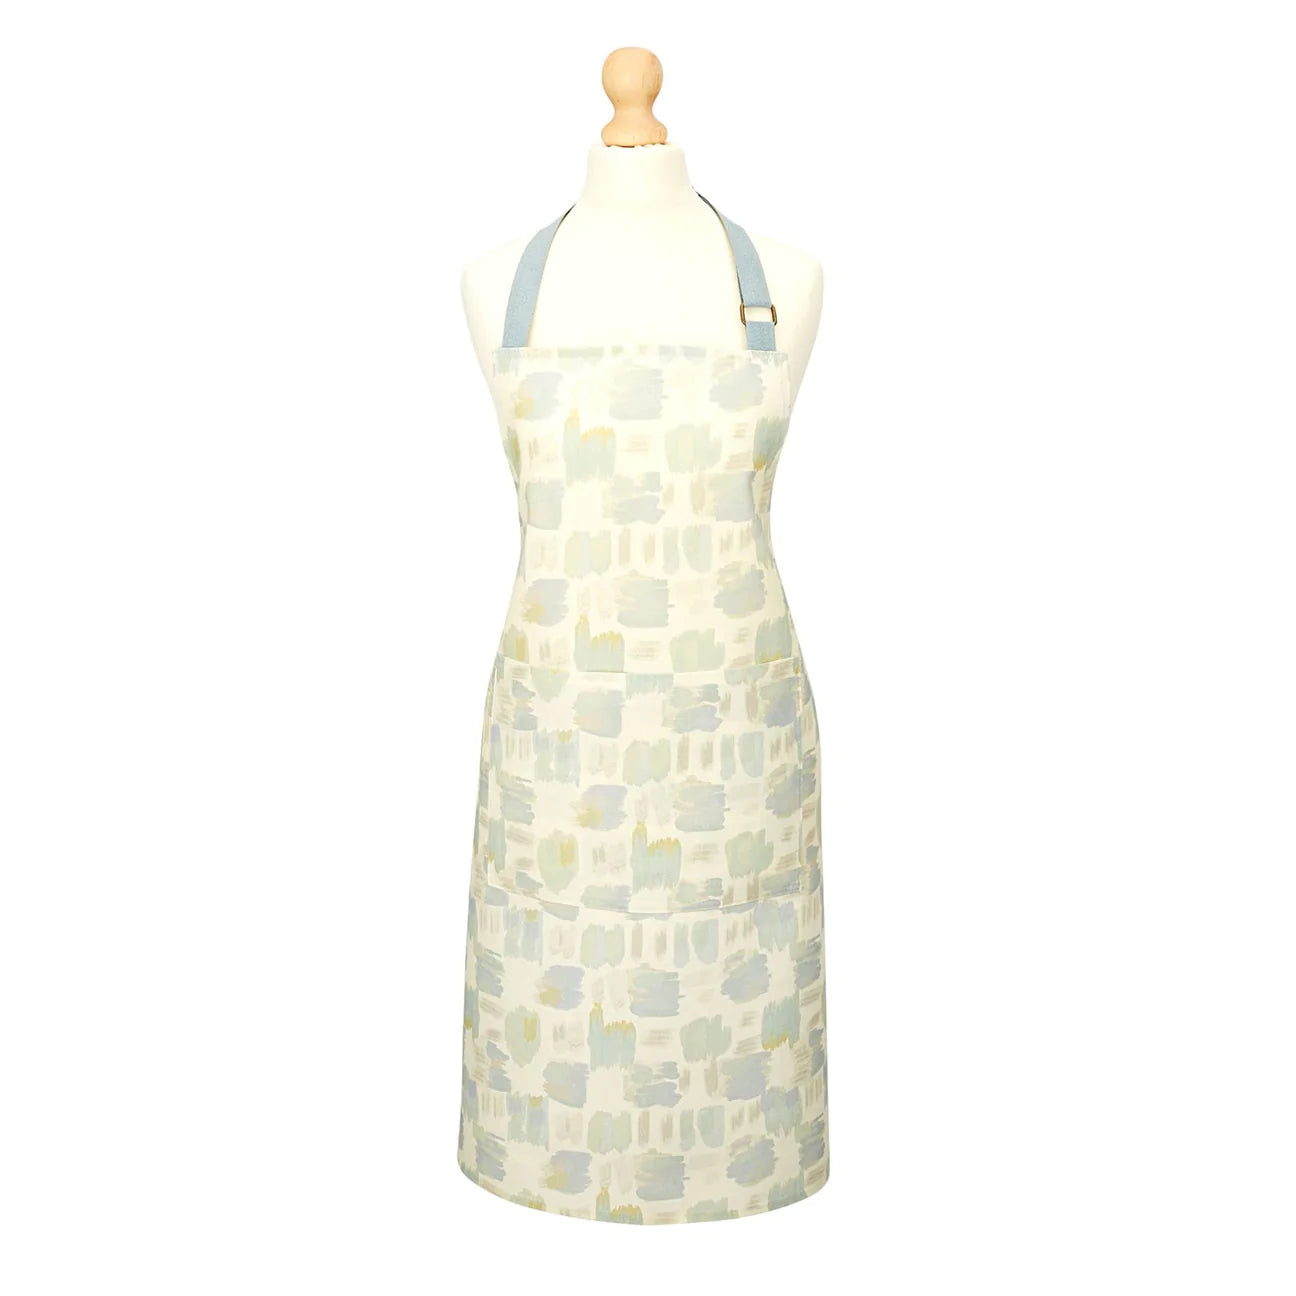 Apron Recycled Cotton Murlough